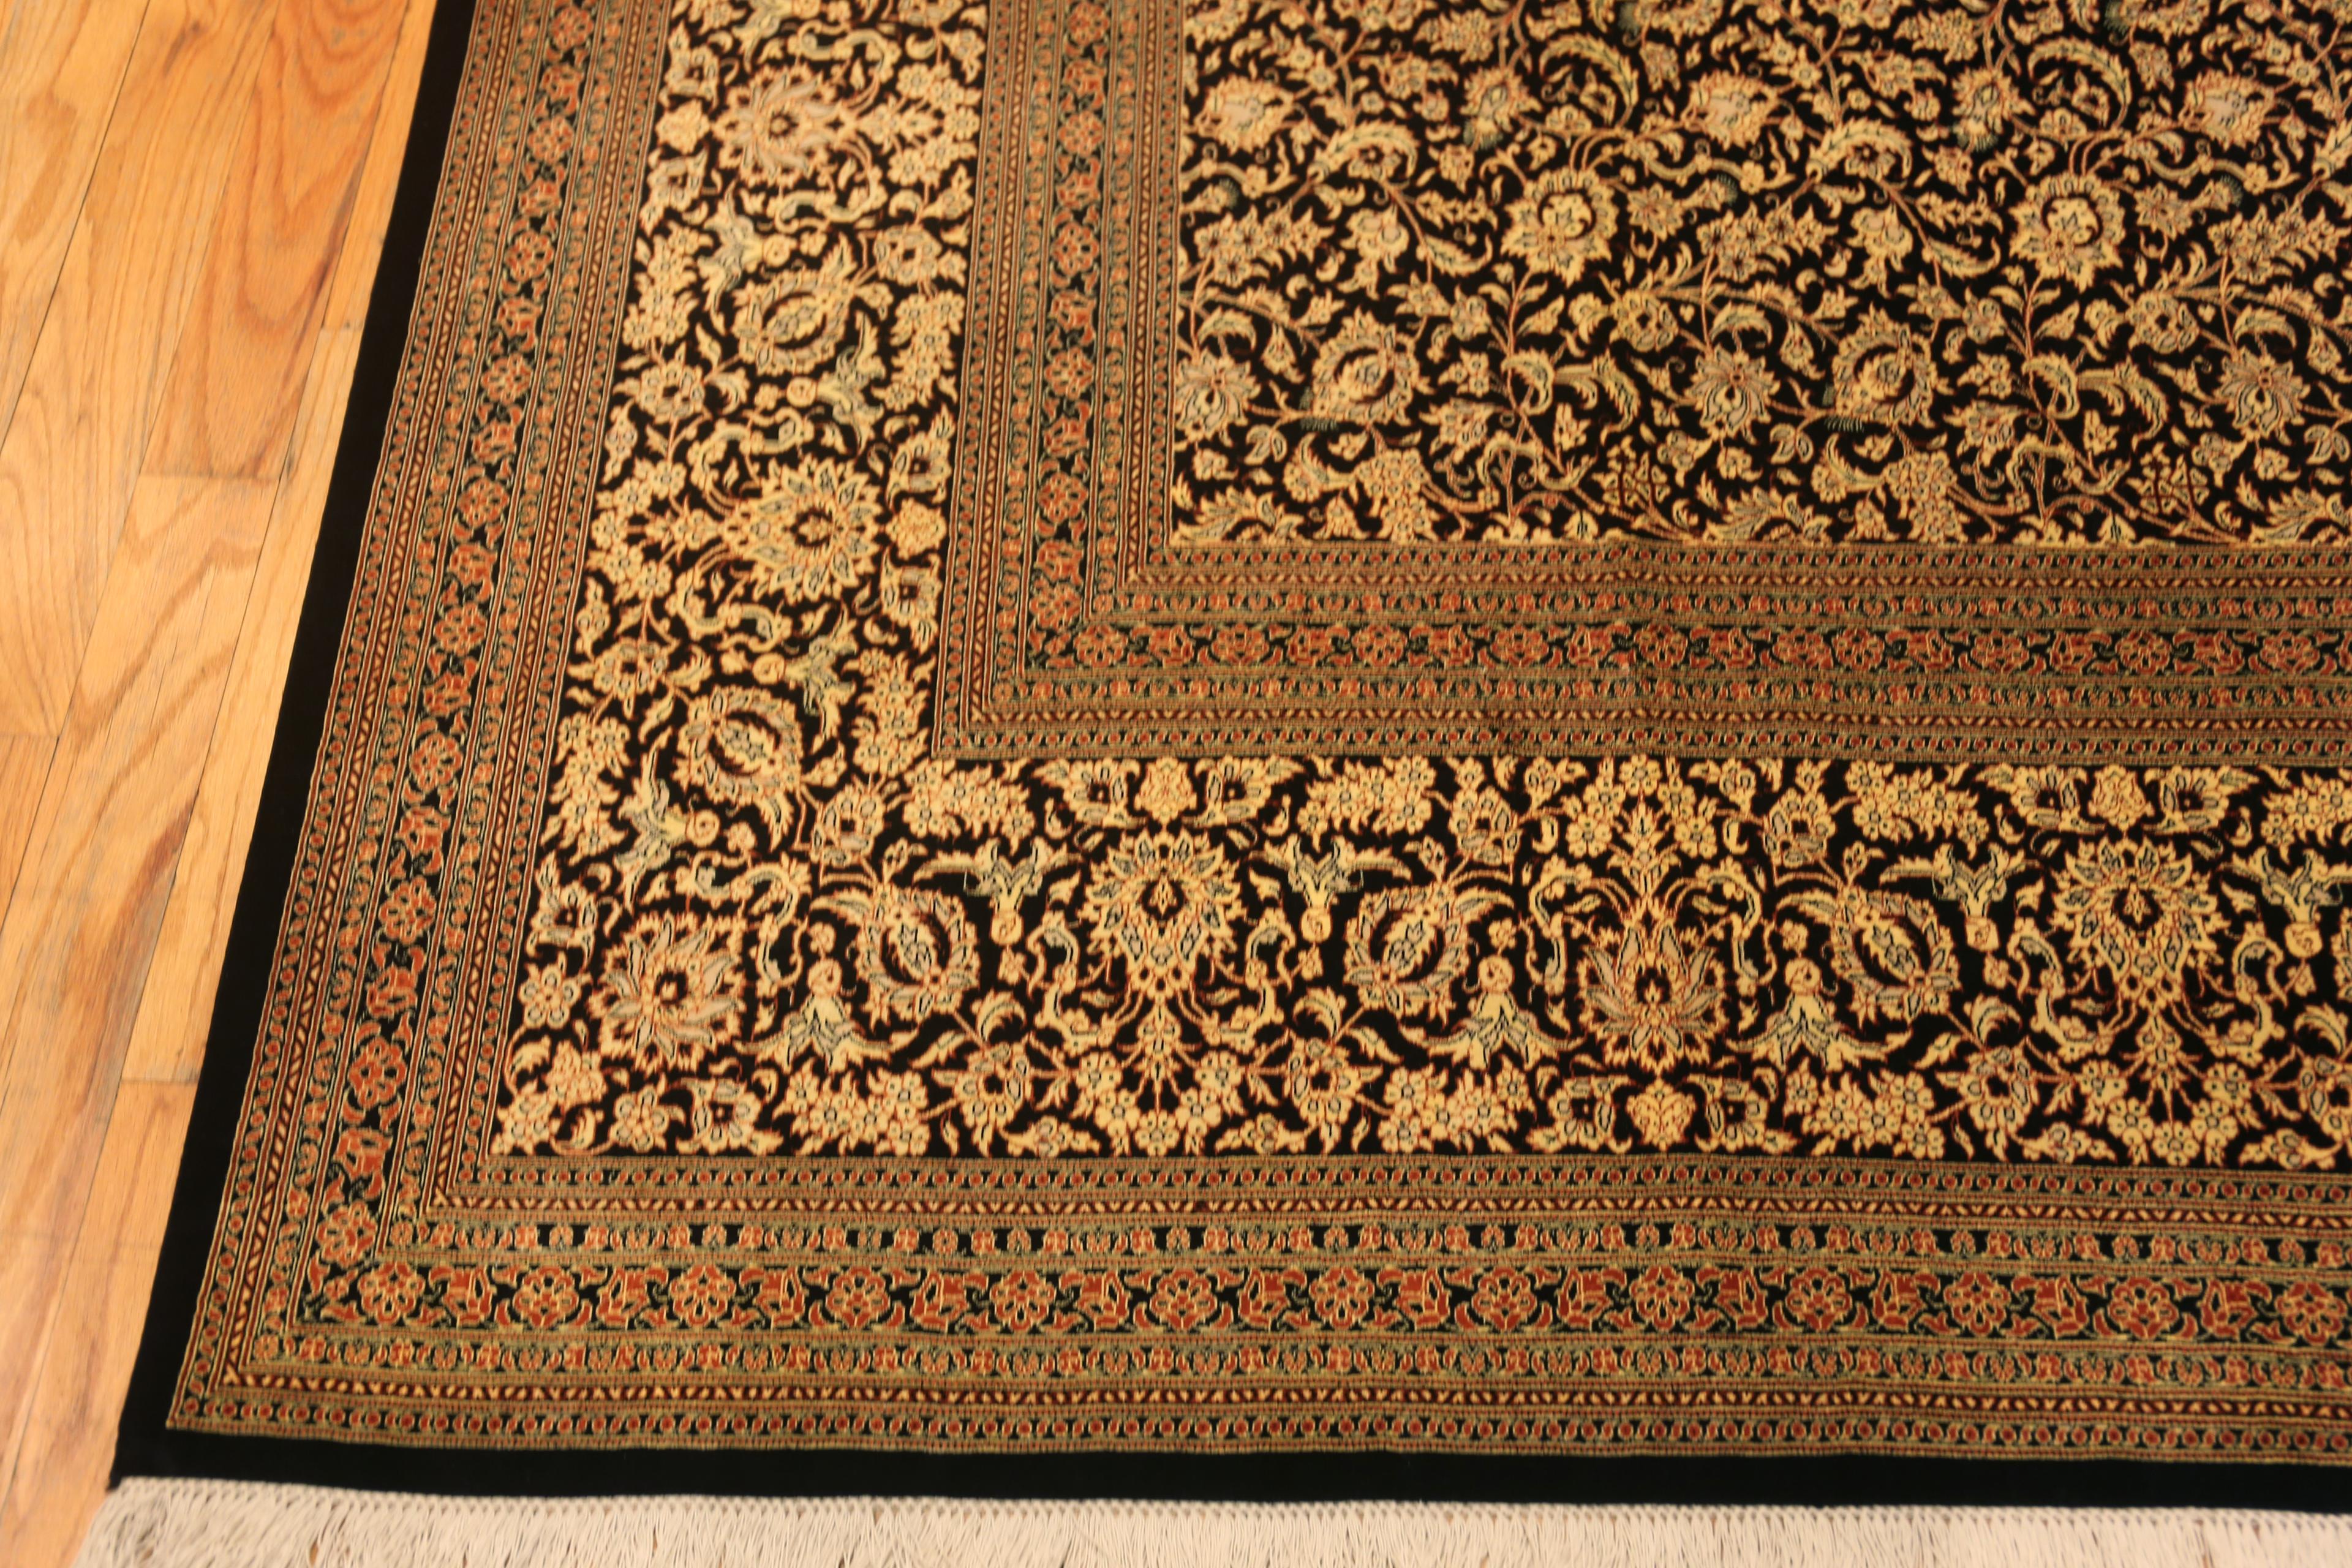 Hand-Knotted Beautiful Allover Floral Luxurious Vintage Persian Silk Qum Rug 9'9